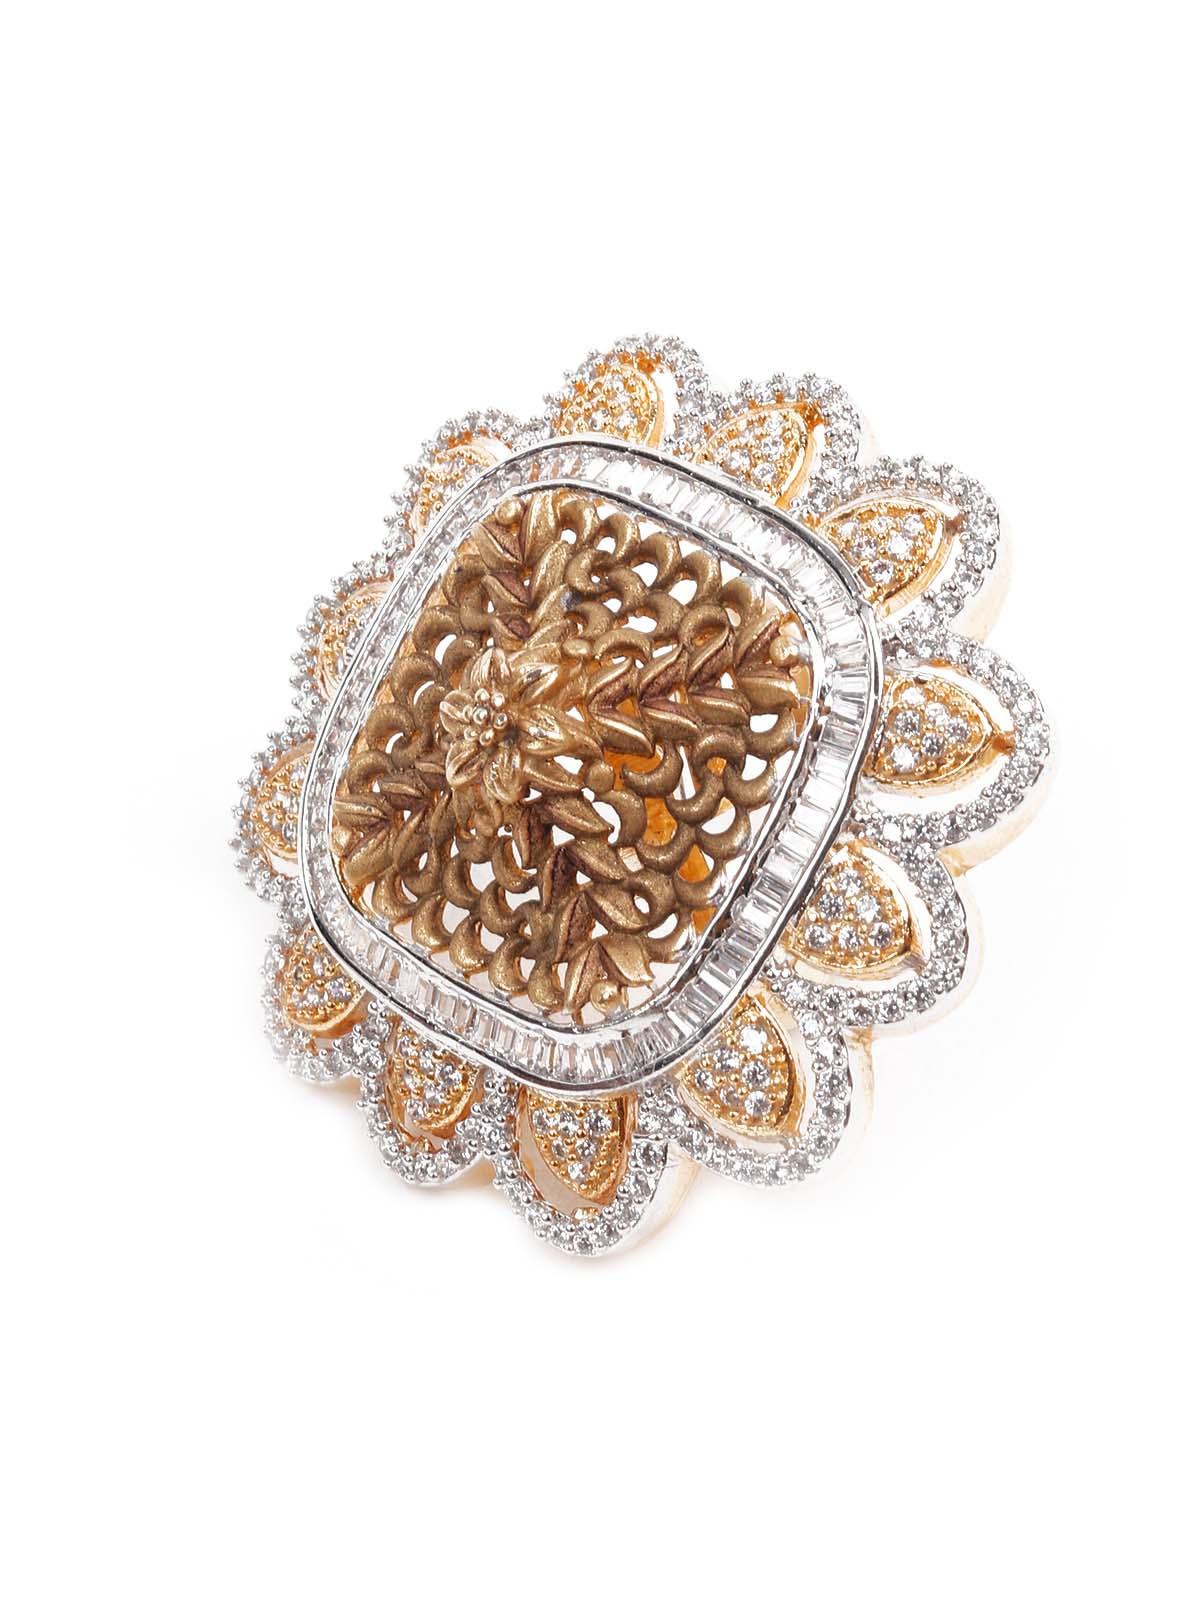 Women's Unique Austrian Diamond And Gold Studded Ring - Odette